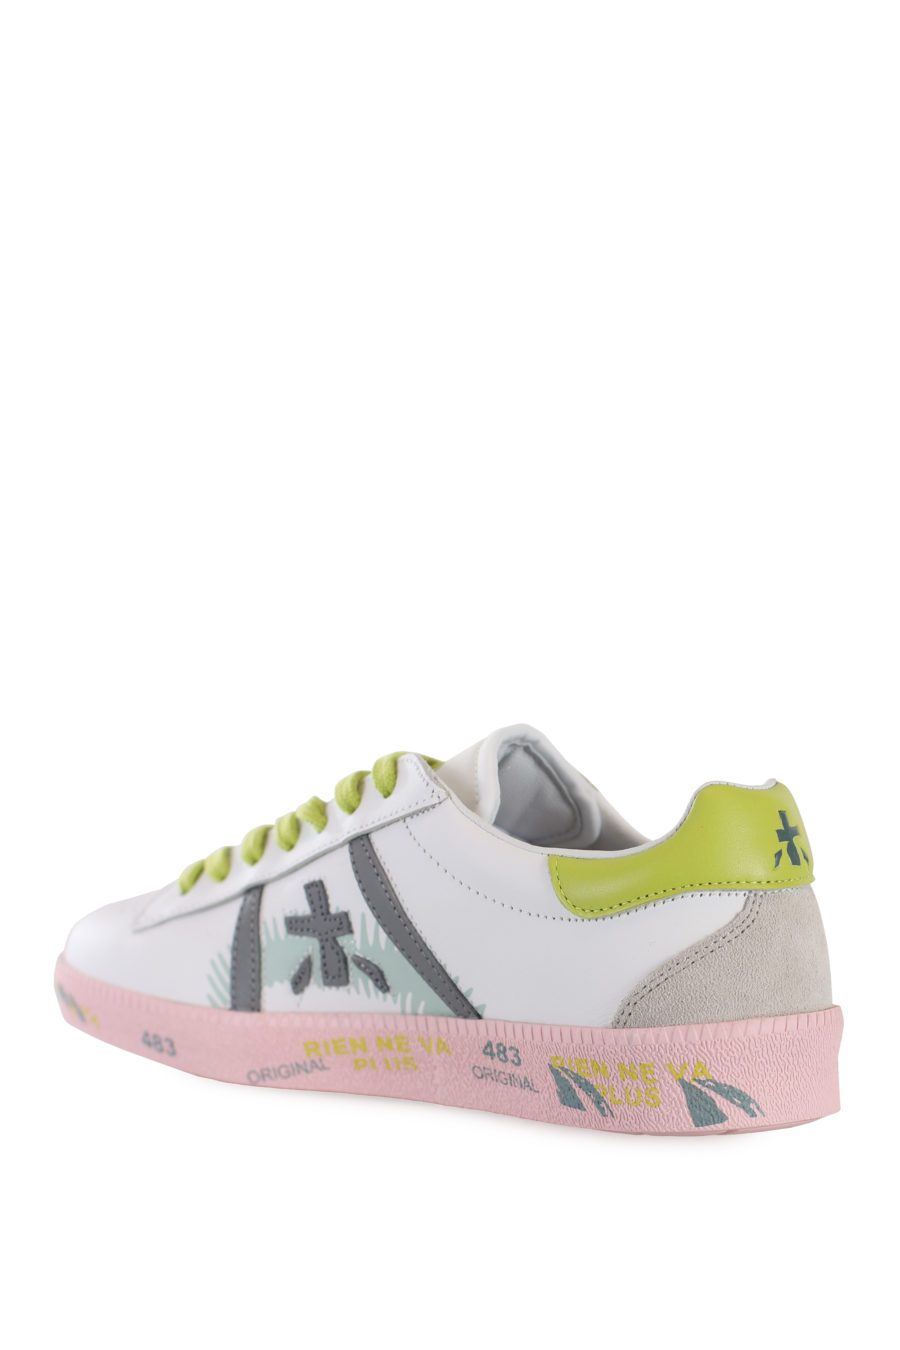 White trainers with green details and pink sole "Andyd" - IMG 1698